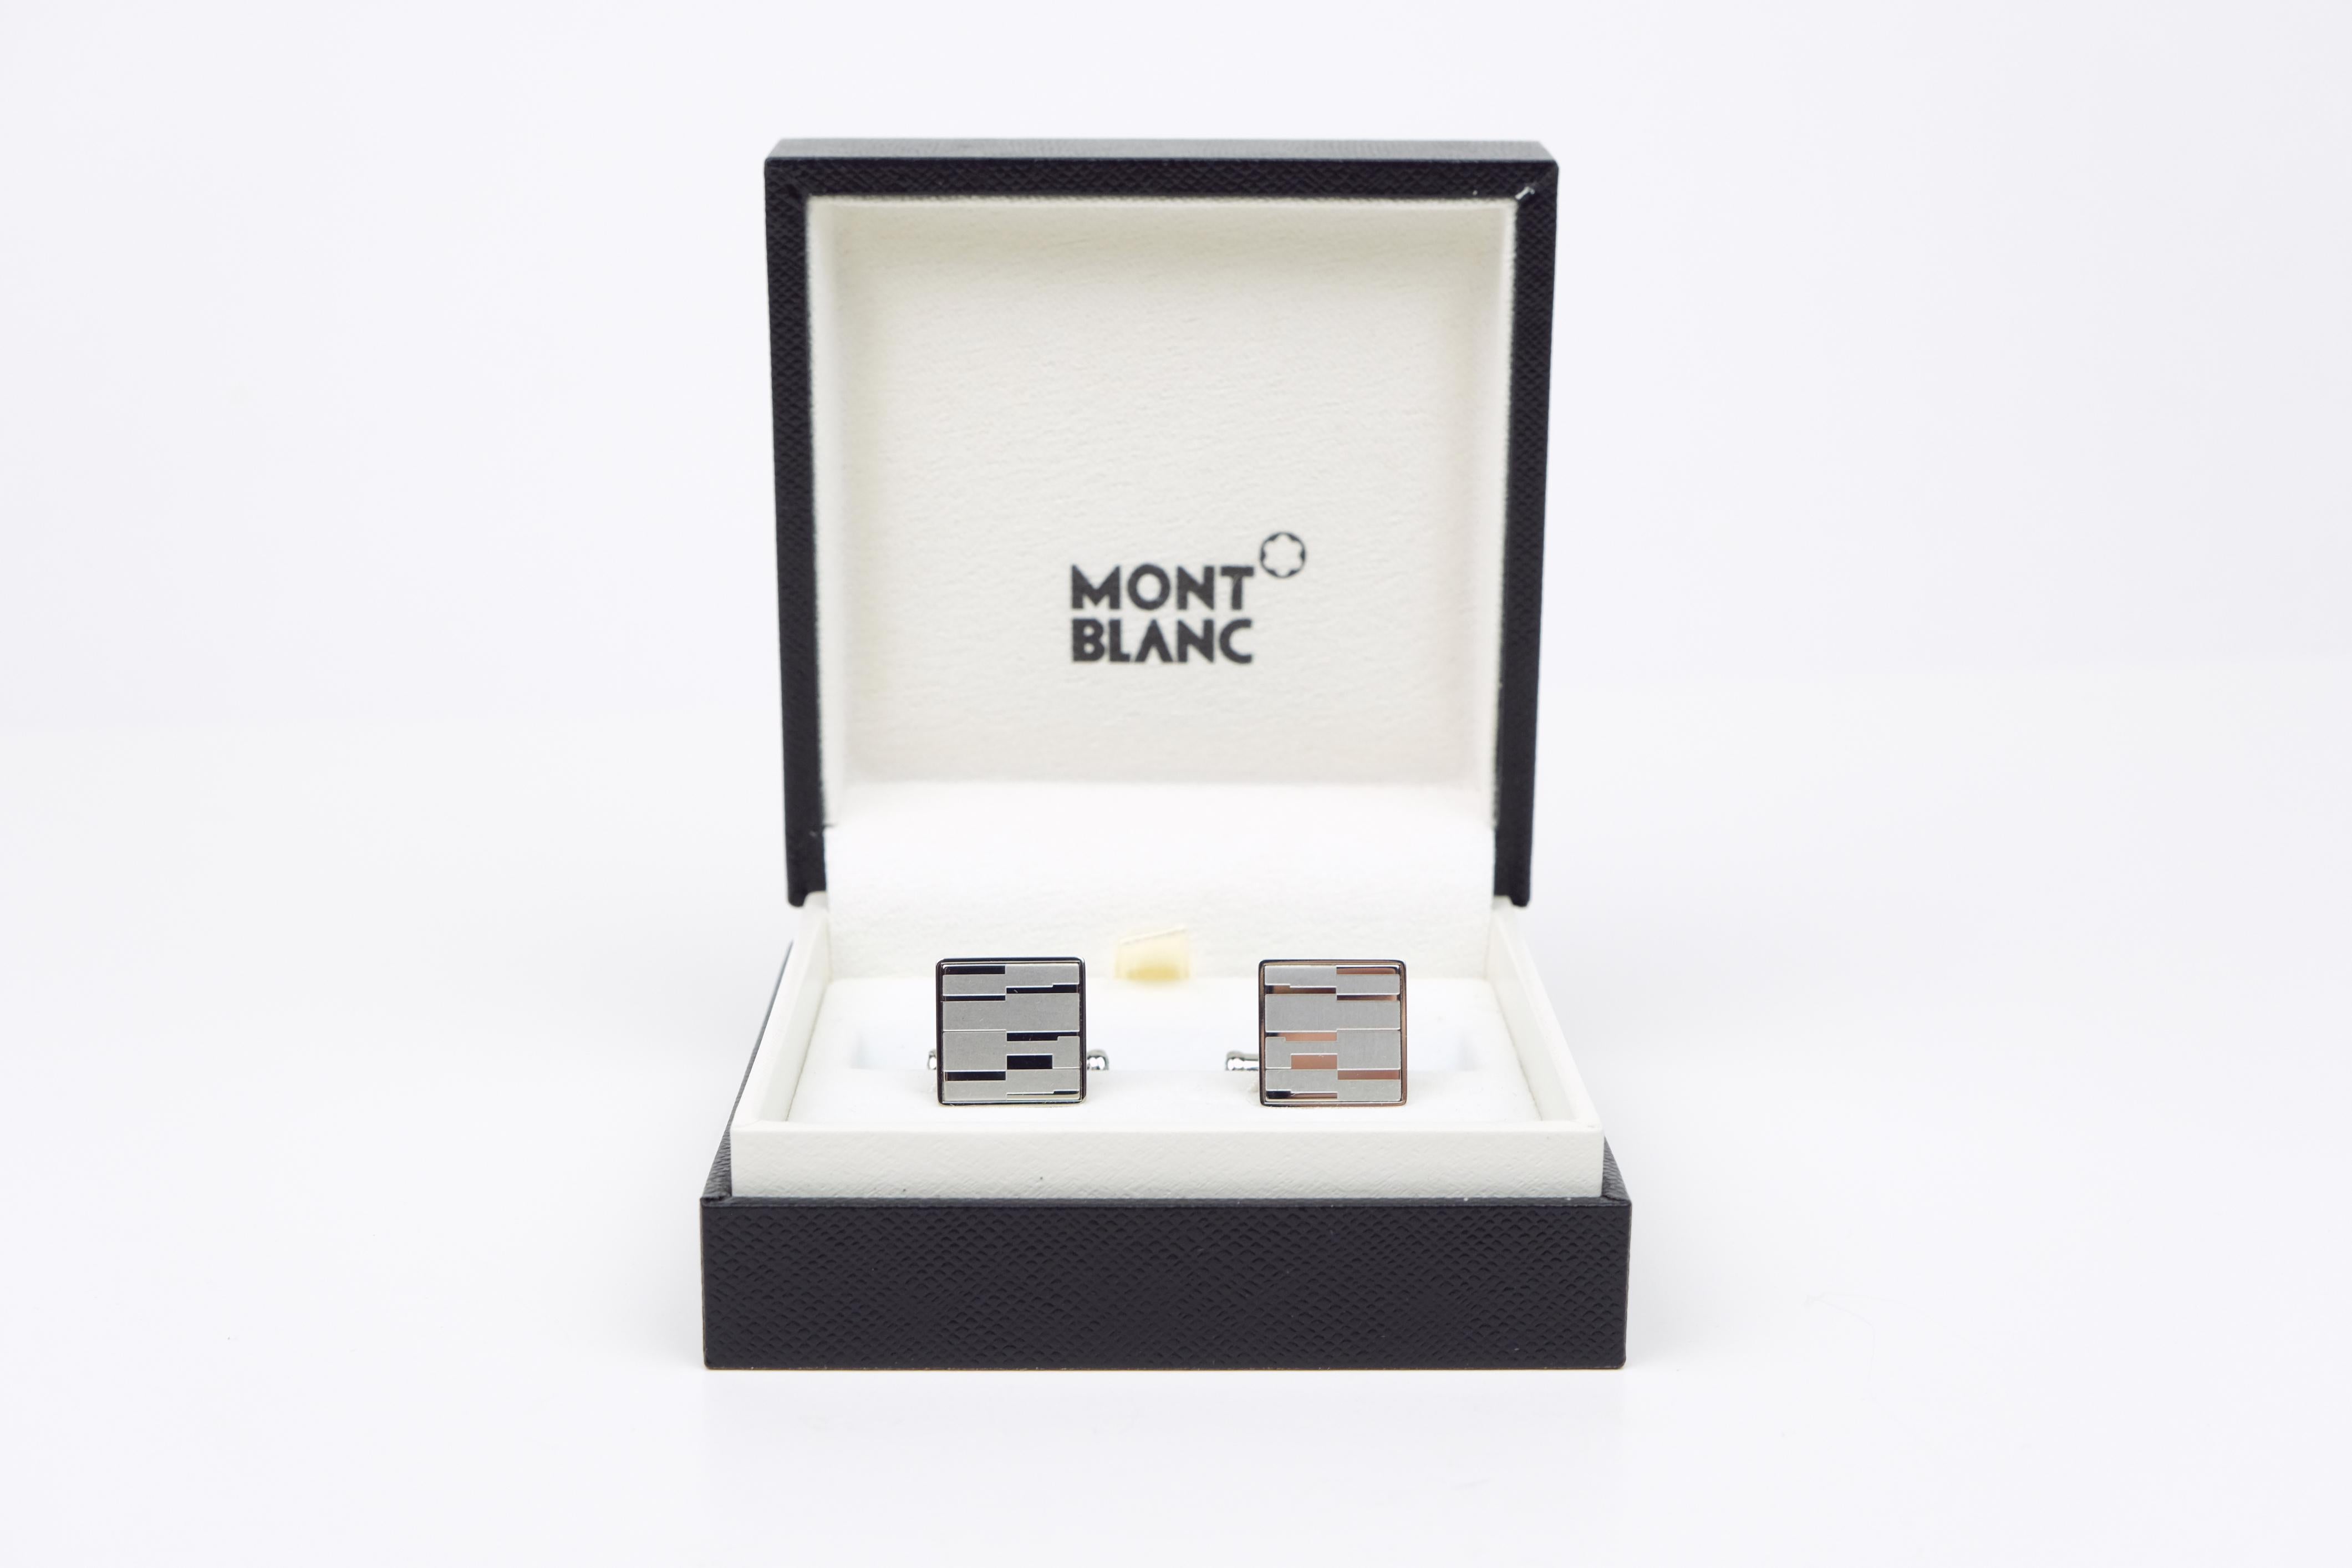 Montblanc Iconic Square Shaped Mystery Motif Stainless Steel Cufflinks 111316 In Excellent Condition In Bradford, Ontario